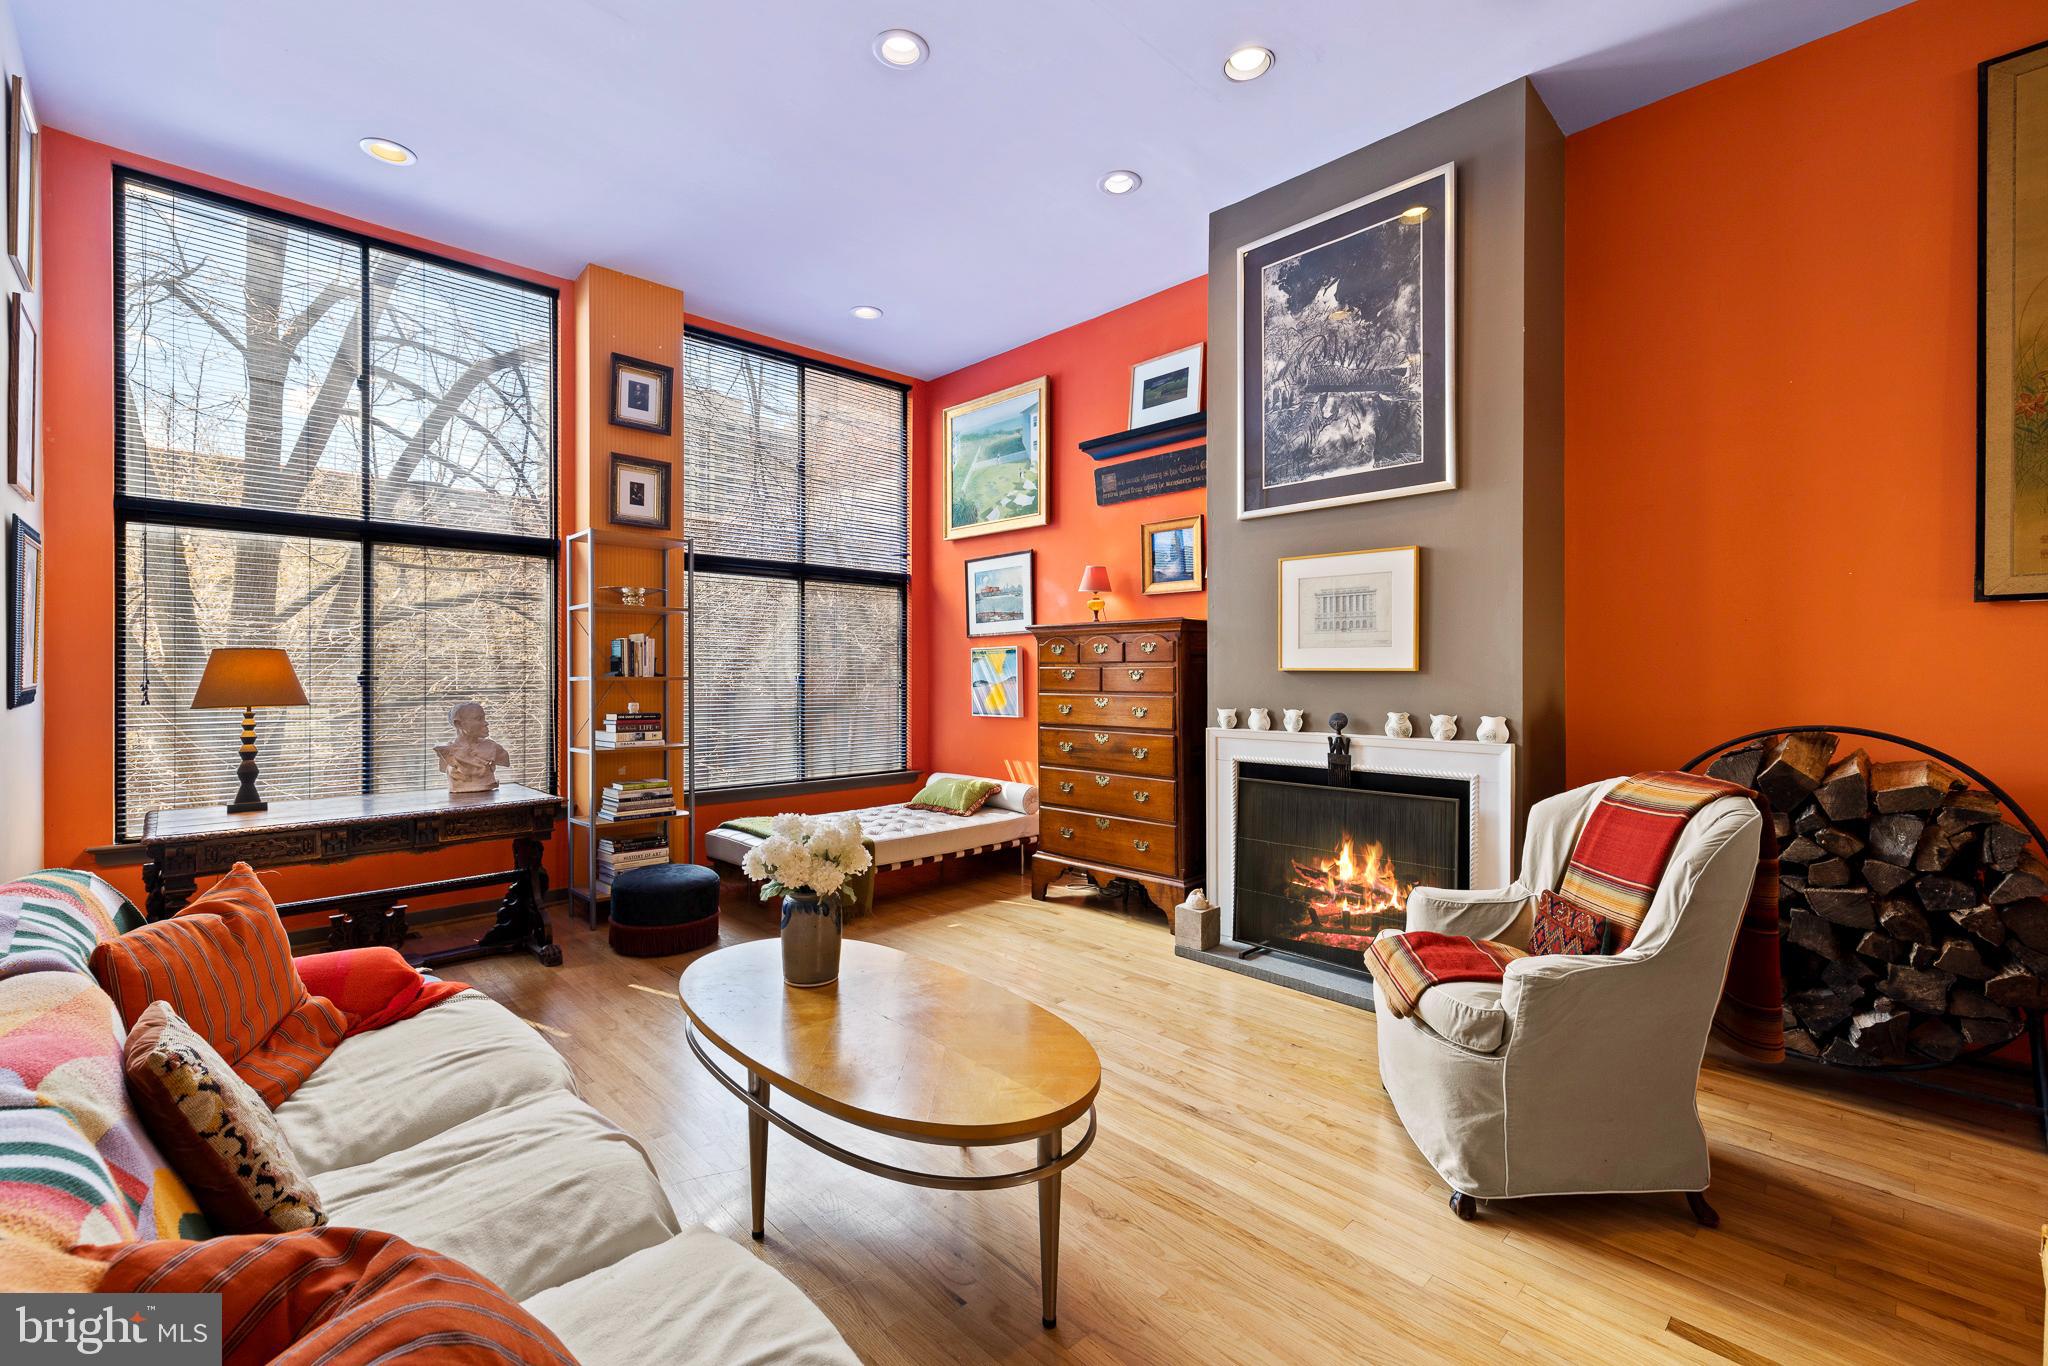 a living room with furniture a fireplace and large windows